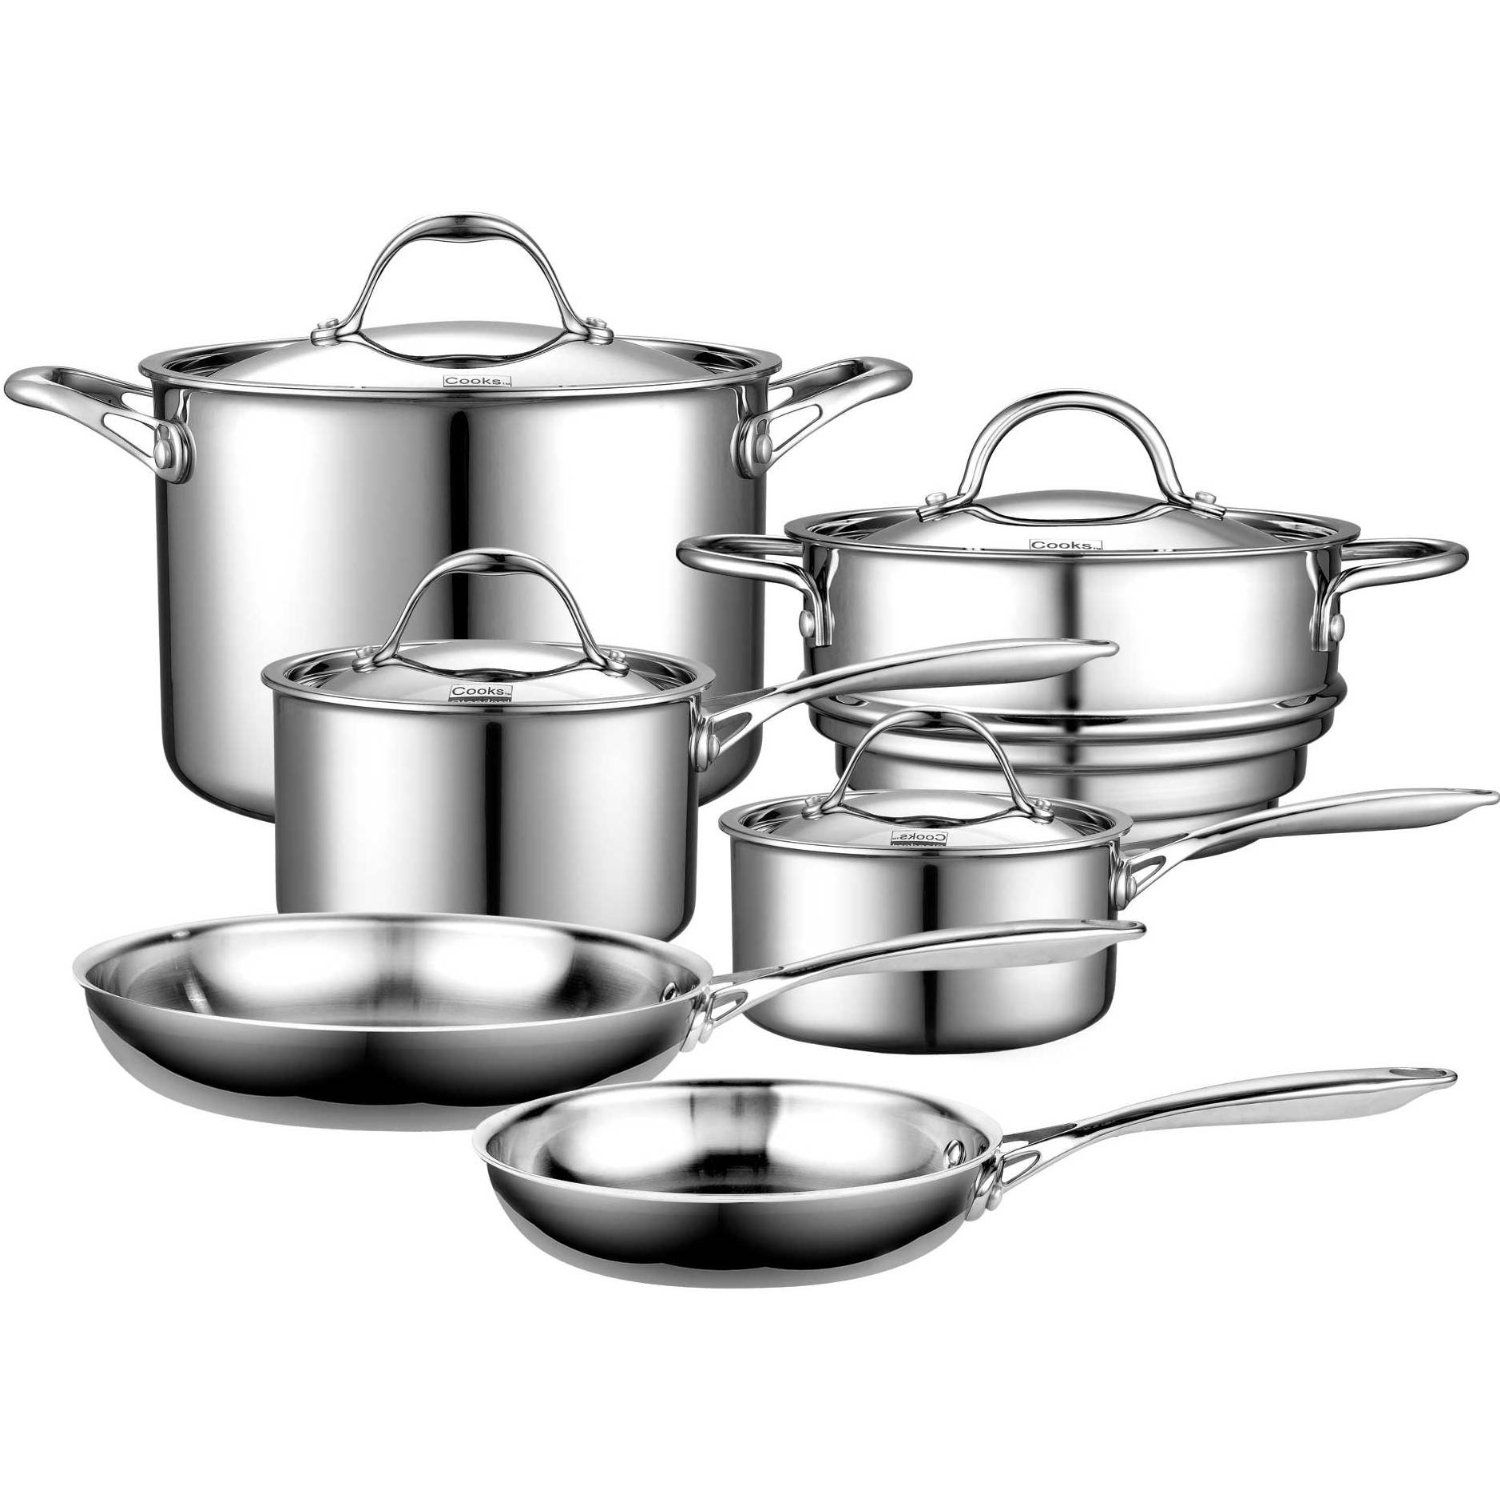 Cooks Standard Multi-Ply Clad Stainless-Steel 10-Piece Cookware Set $129.99 FREE Shipping